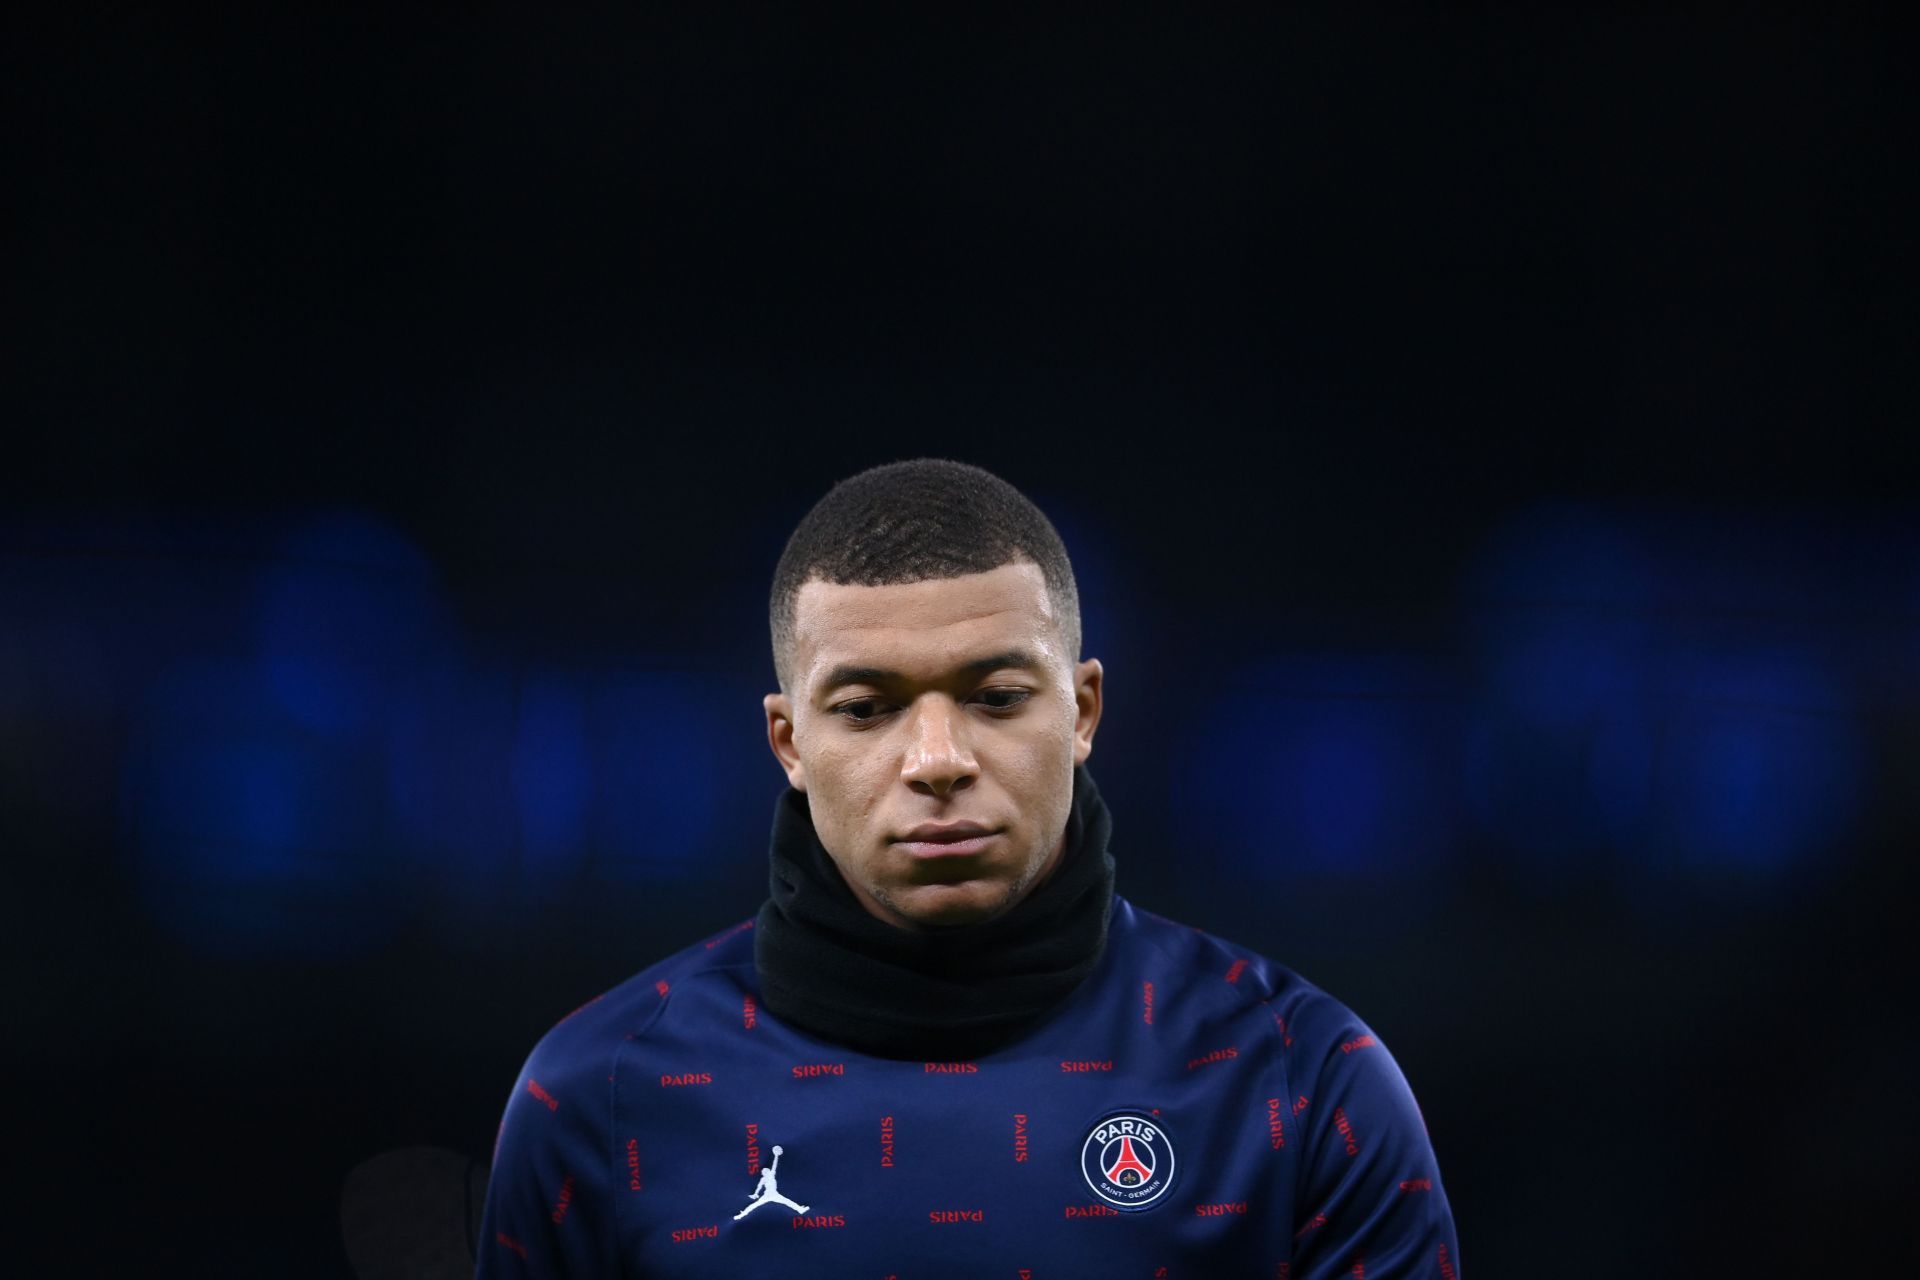 Kylian Mbappe has revealed that he is ready to &lsquo;discover something else&rsquo;.